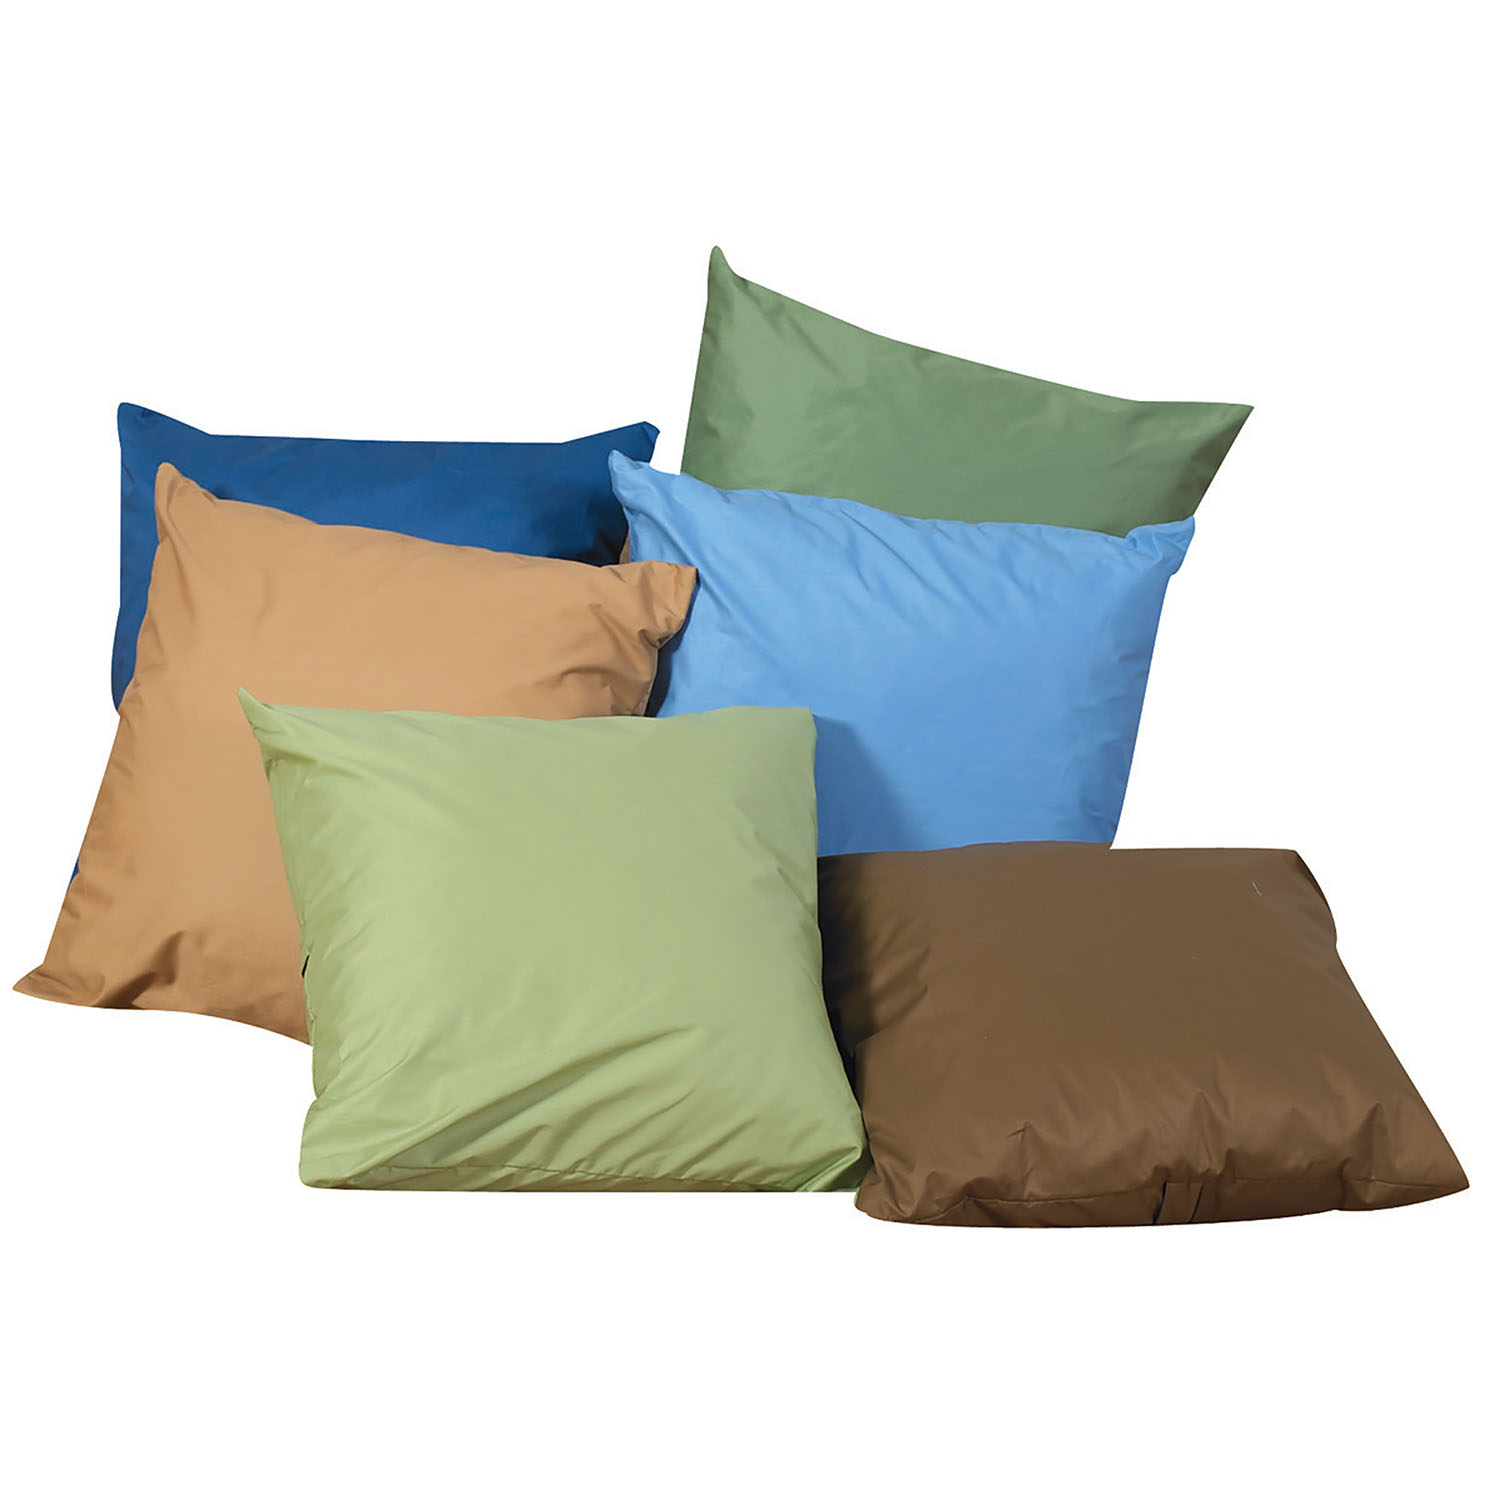 12" Pillows-Cozy Woodland Colors, Set of 6